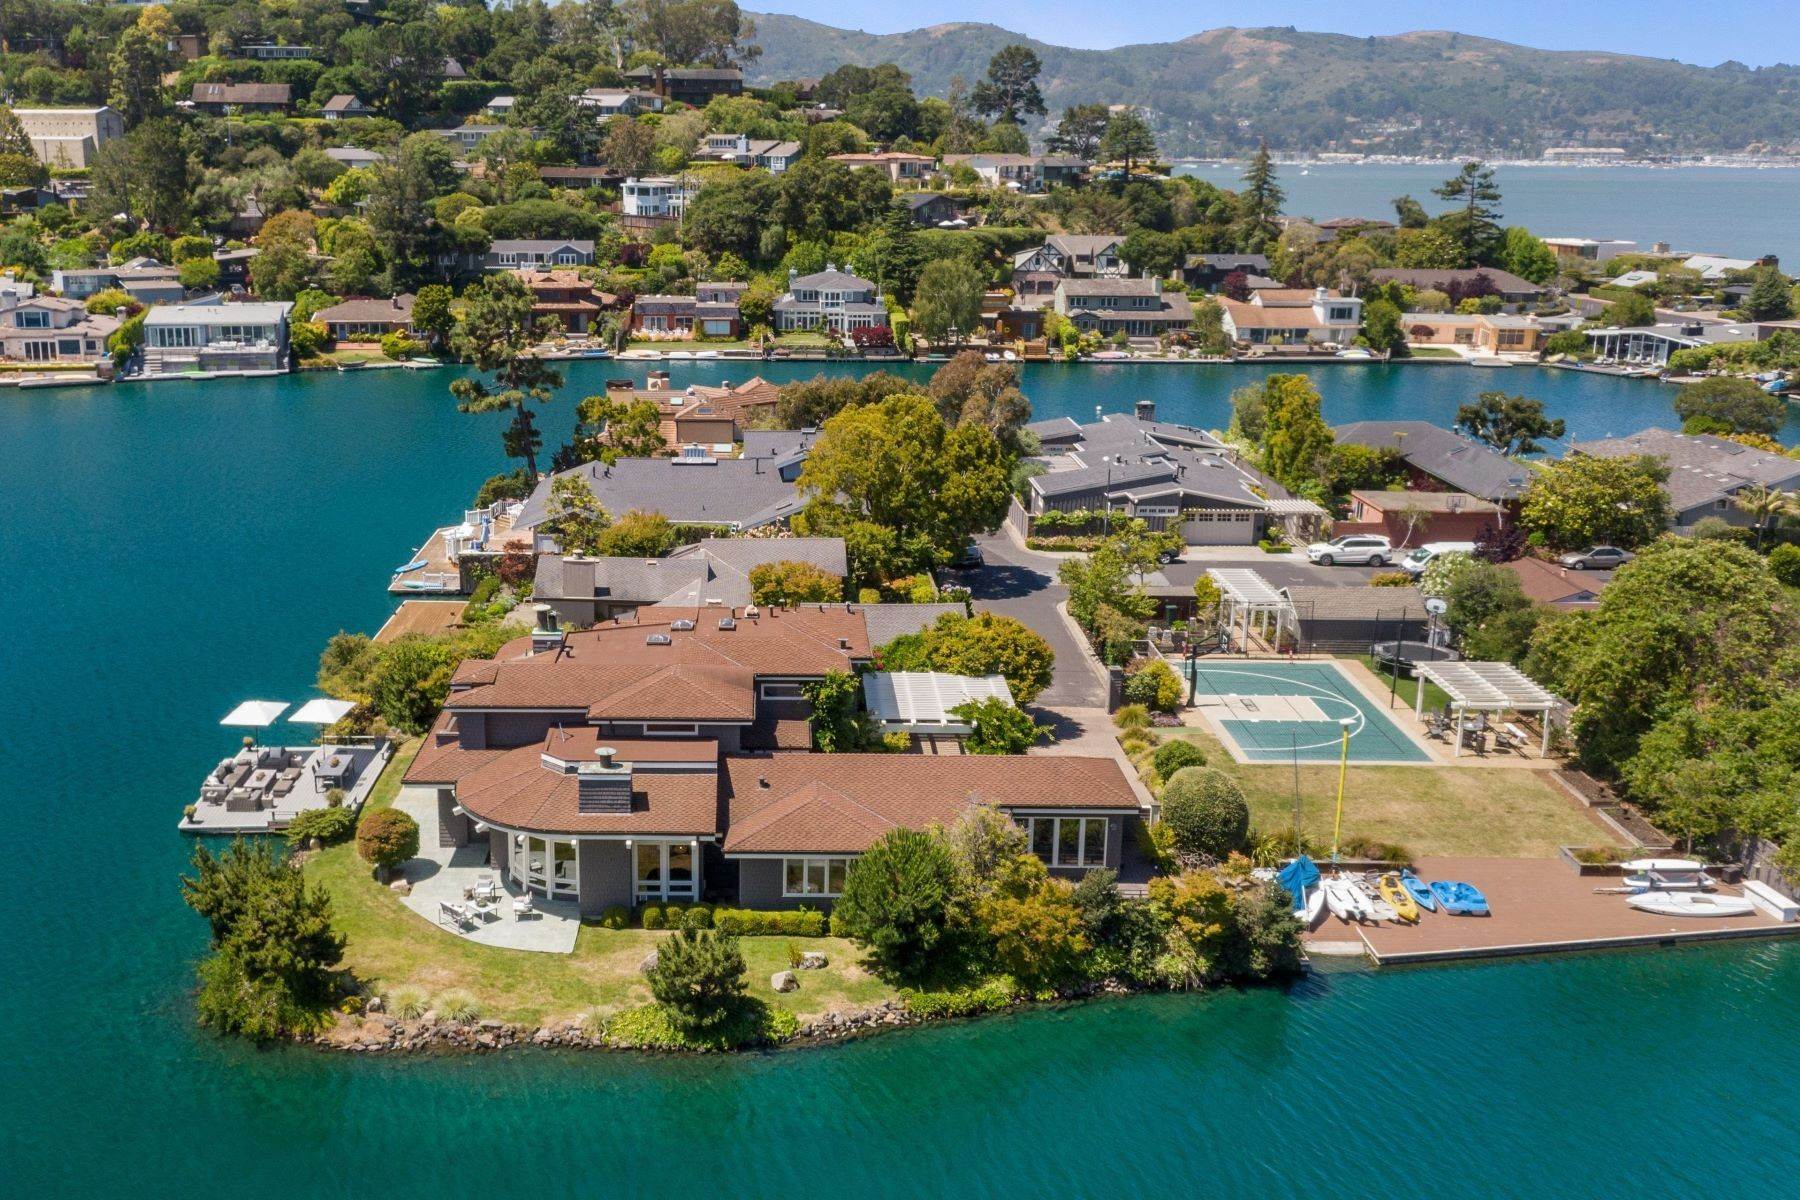 Single Family Homes for Sale at Iconic Gated Belvedere Lagoon Compound 14-16 Edgewater Road Belvedere, California 94920 United States